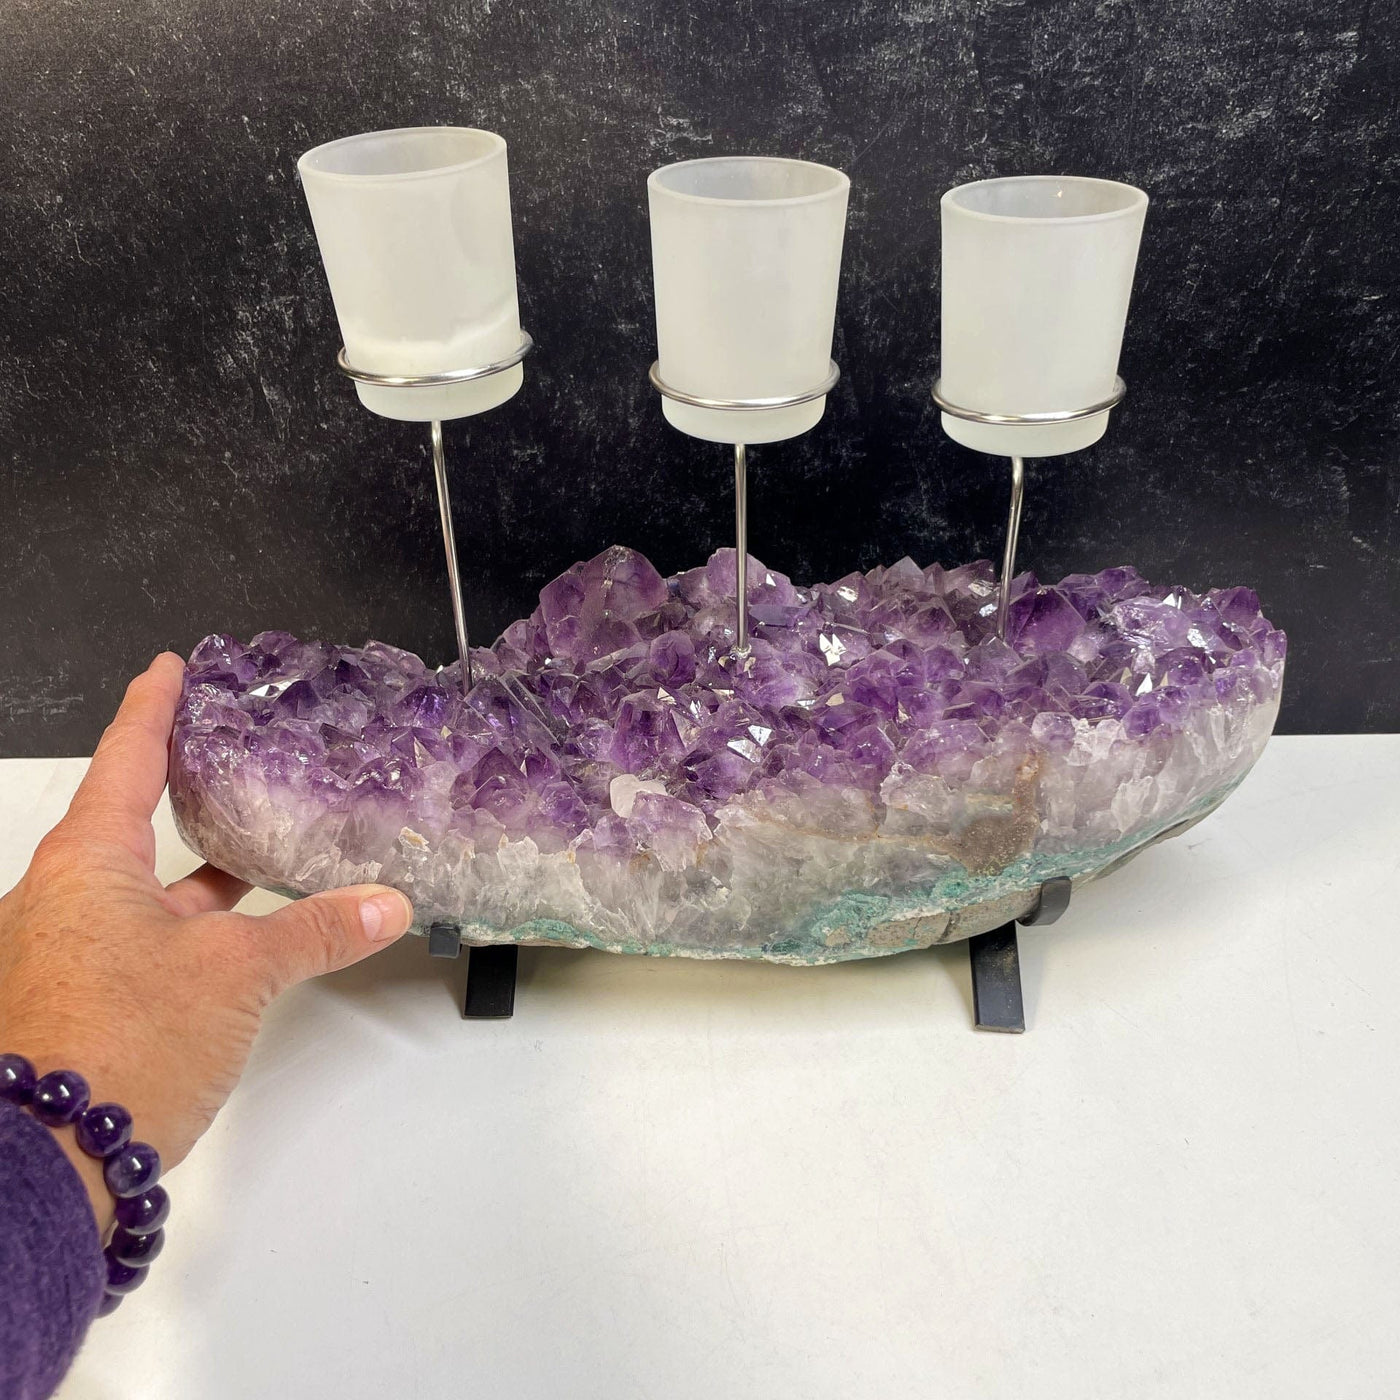 Amethyst Cluster Base with 3 Votive Candle Holders with a hand for size reference